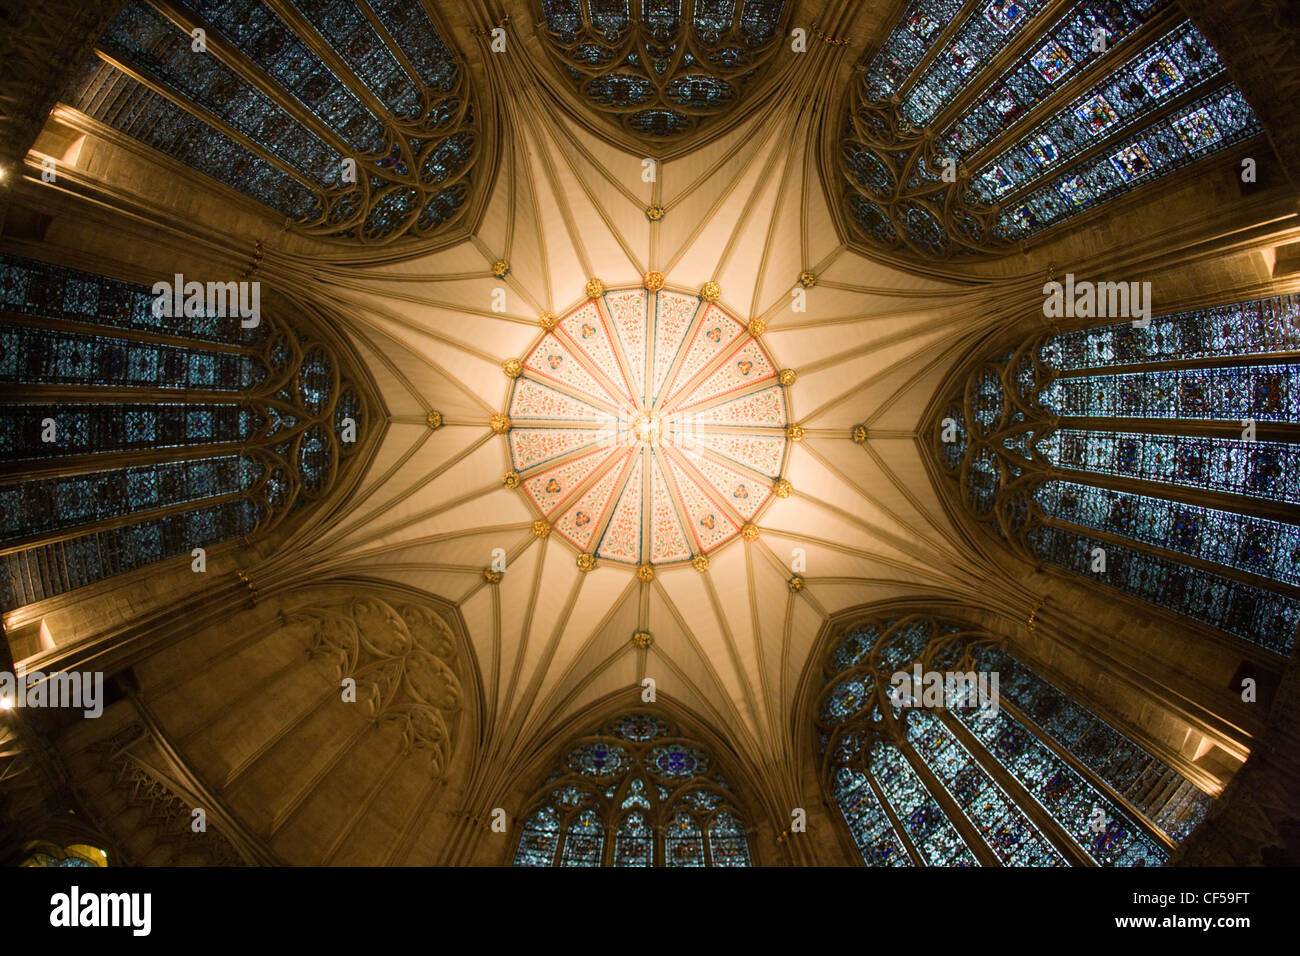 The beautiful fan-vaulted ceiling and stained glass windows in the Chapter House, York Minster, York Stock Photo